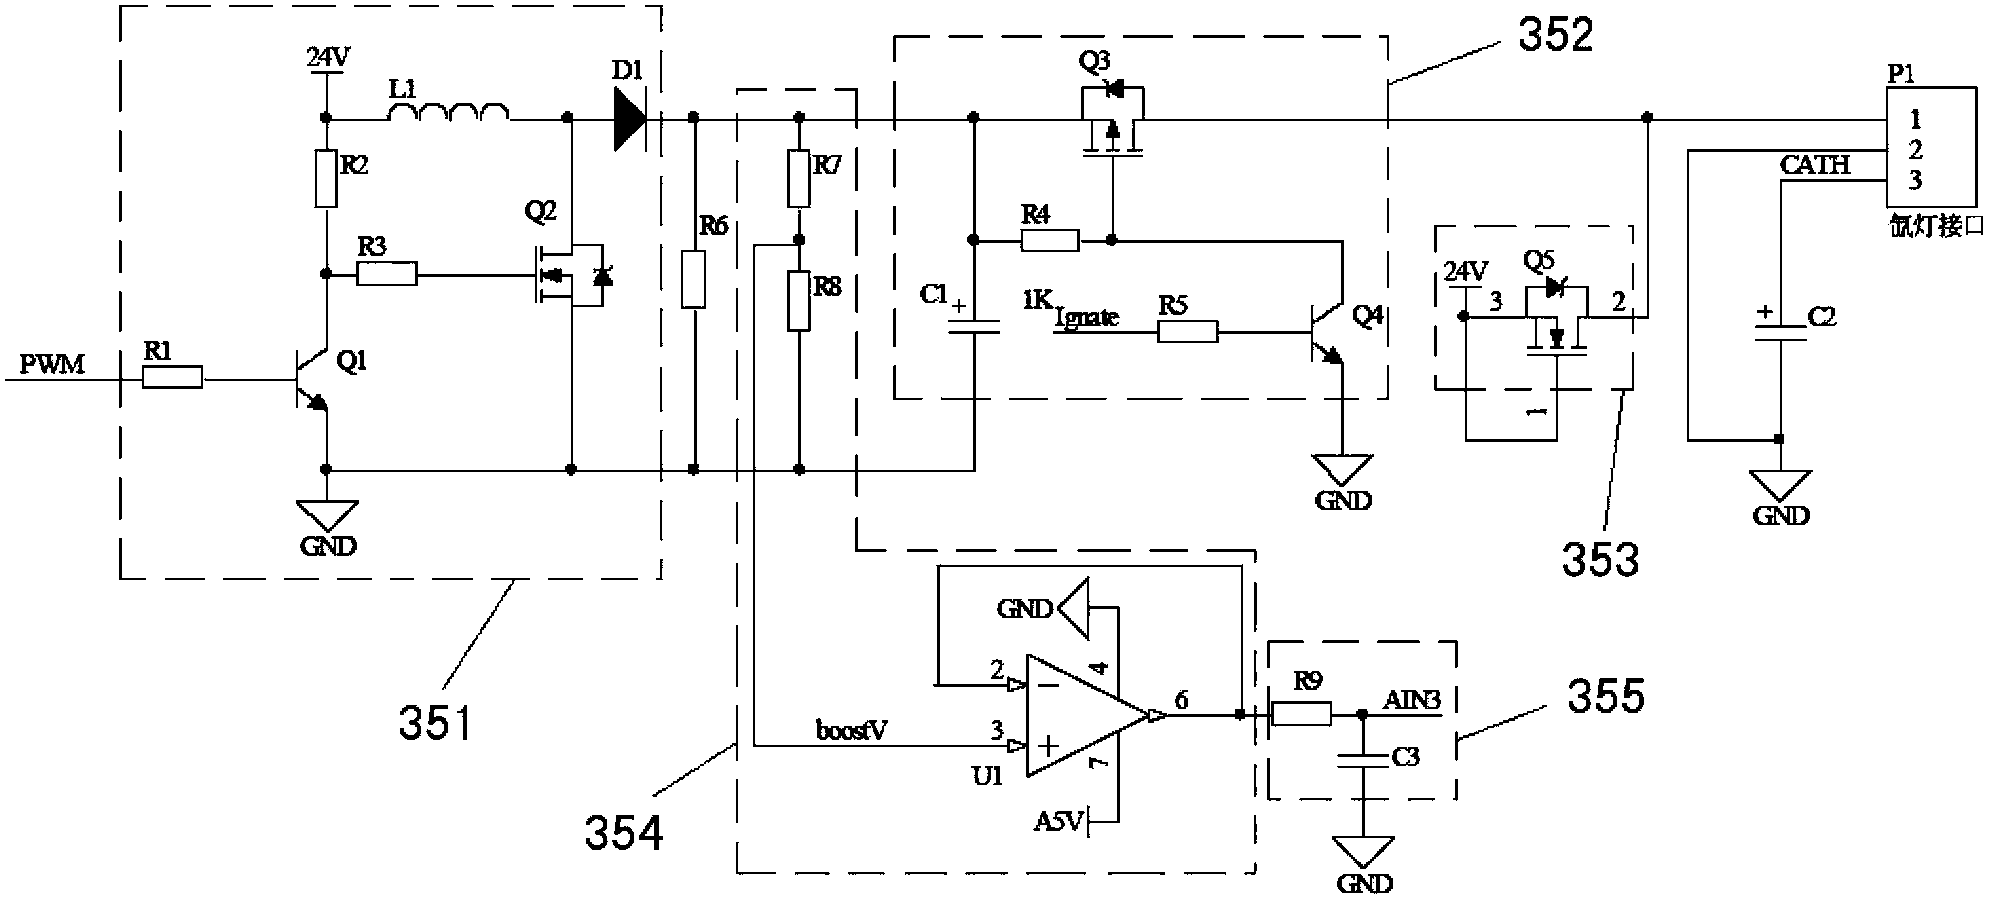 Xenon lamp power source for instrument